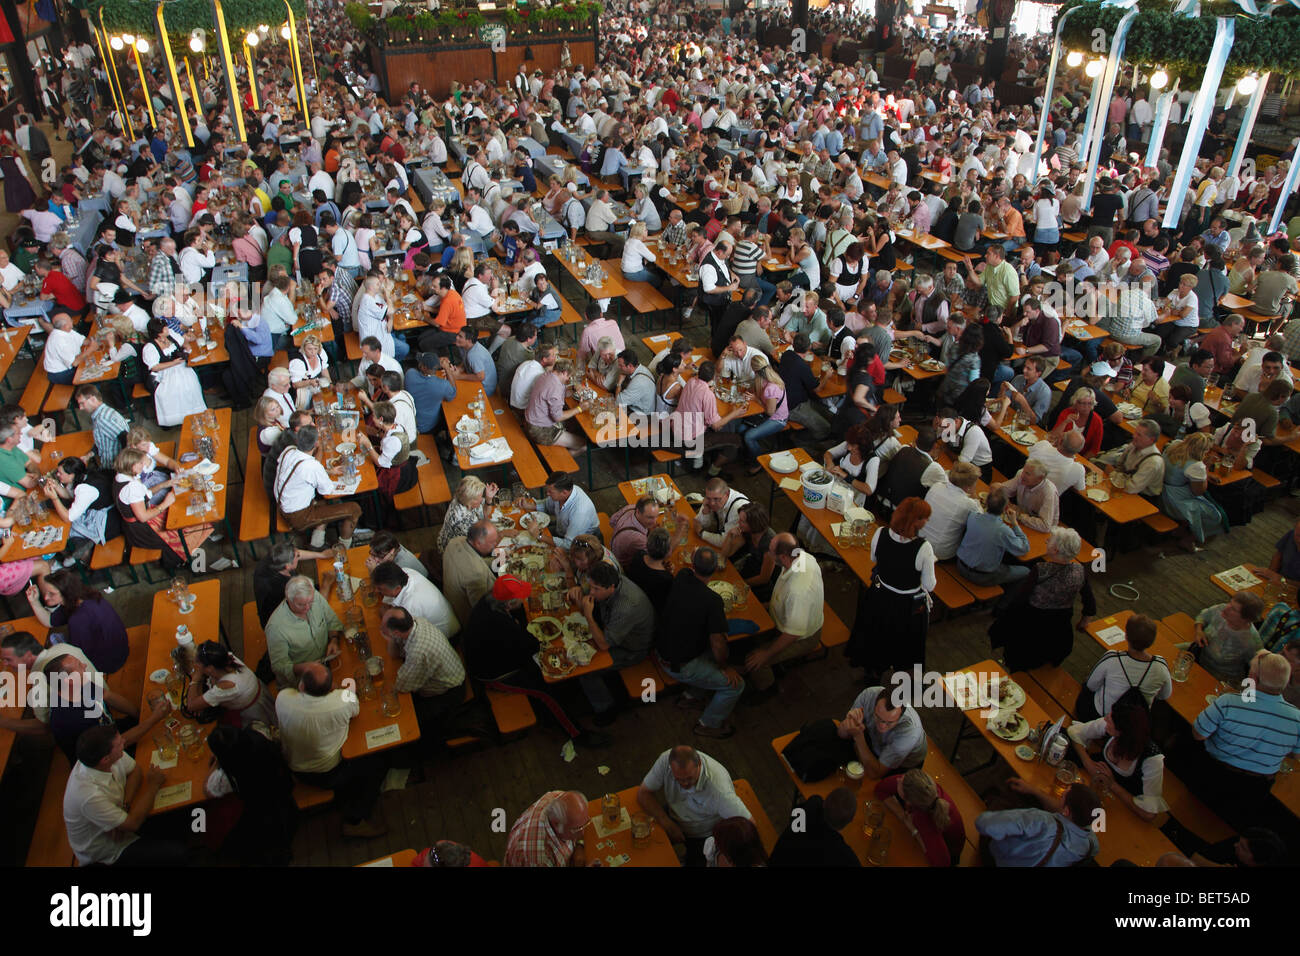 Germany, Bavaria, Munich, l'Oktoberfest, Theresienwiese, beer hall Banque D'Images